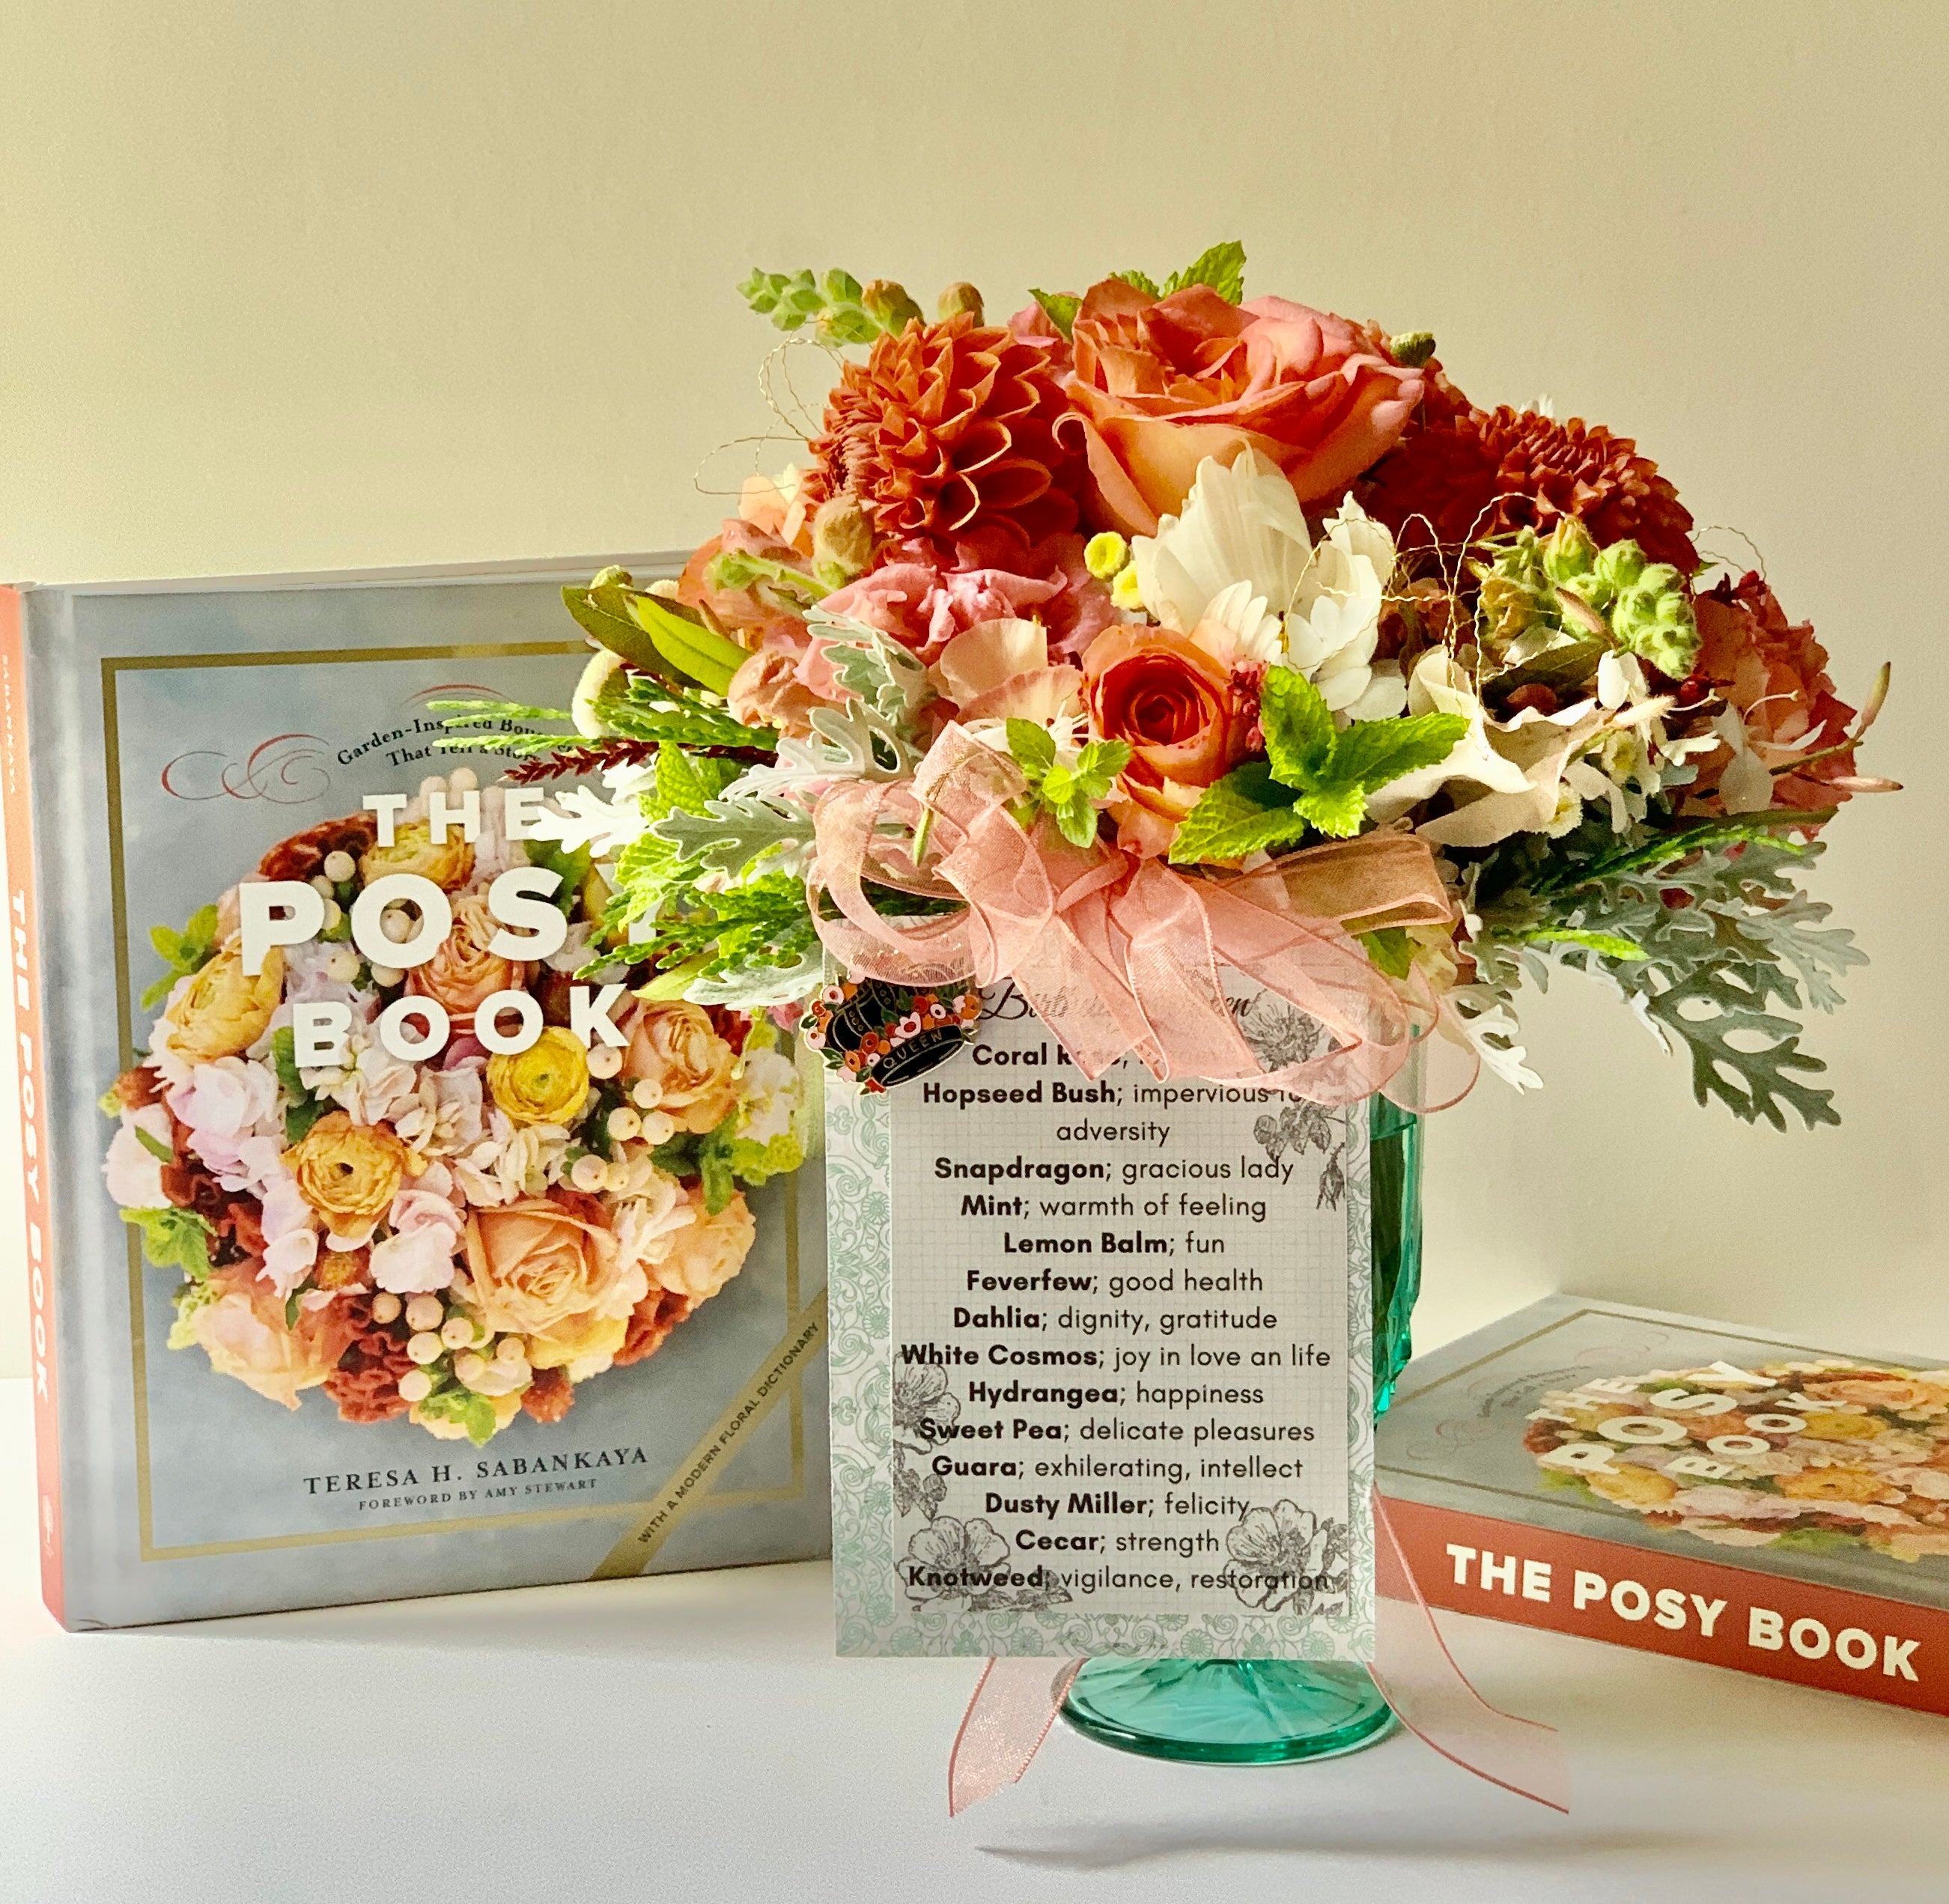 The Birthday Queen Posy and The Posy Book (FREE book through August!)